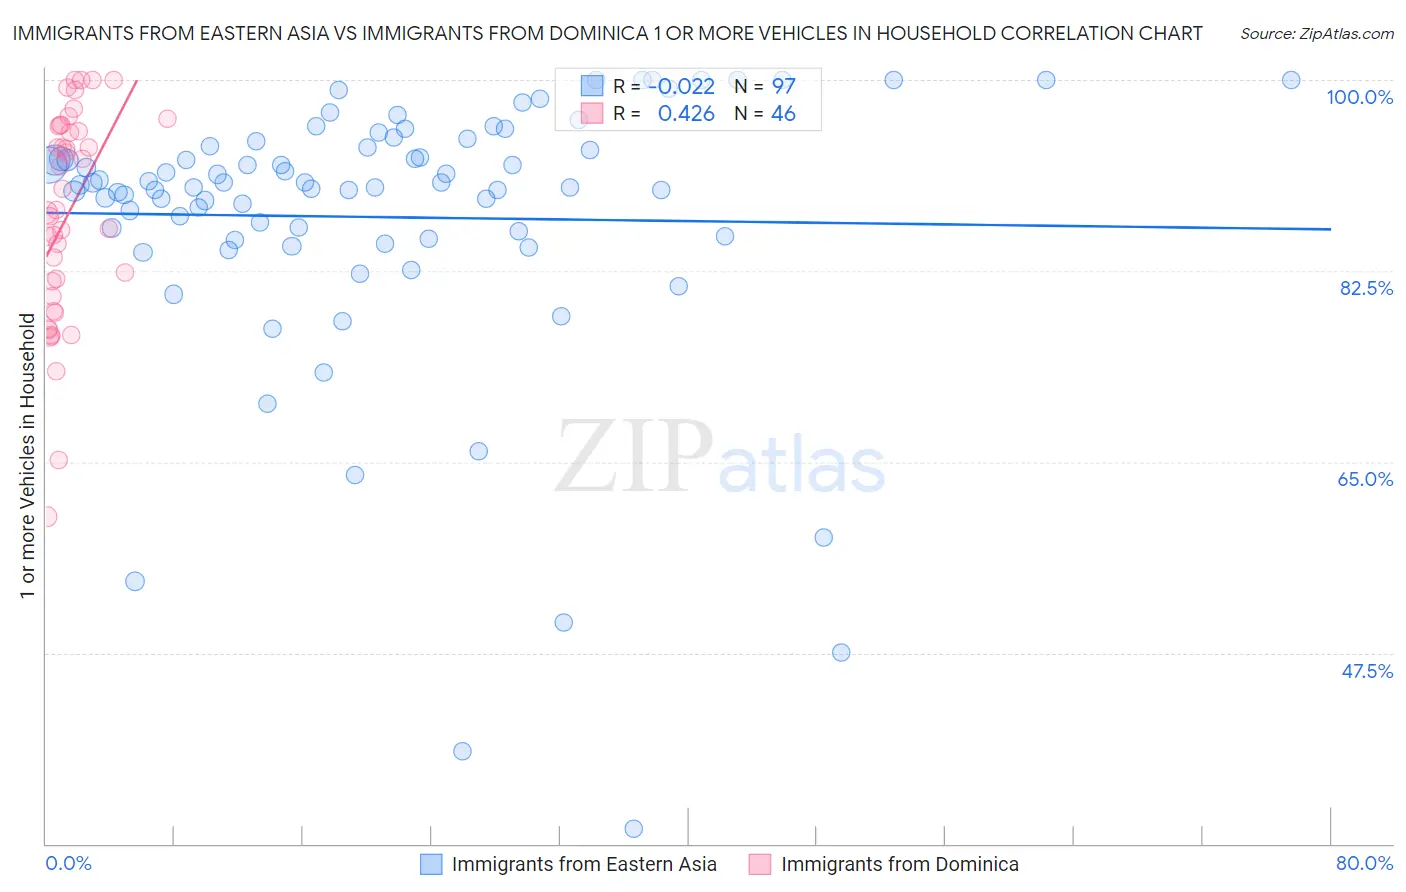 Immigrants from Eastern Asia vs Immigrants from Dominica 1 or more Vehicles in Household